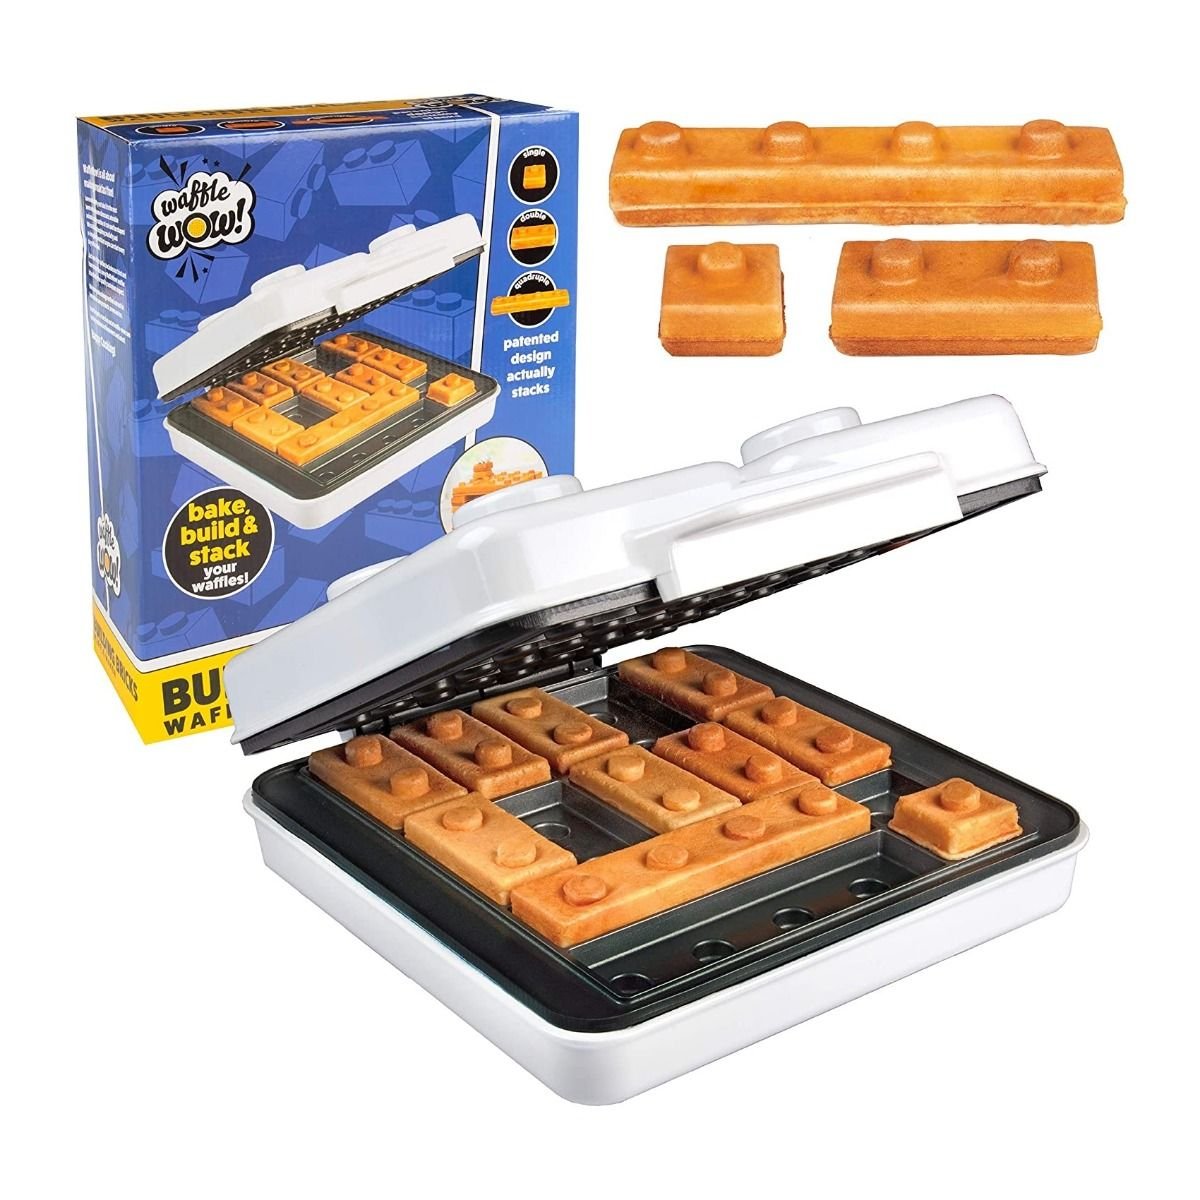 Building Brick Electric Waffle Maker- Cook Fun, Buildable Waffles